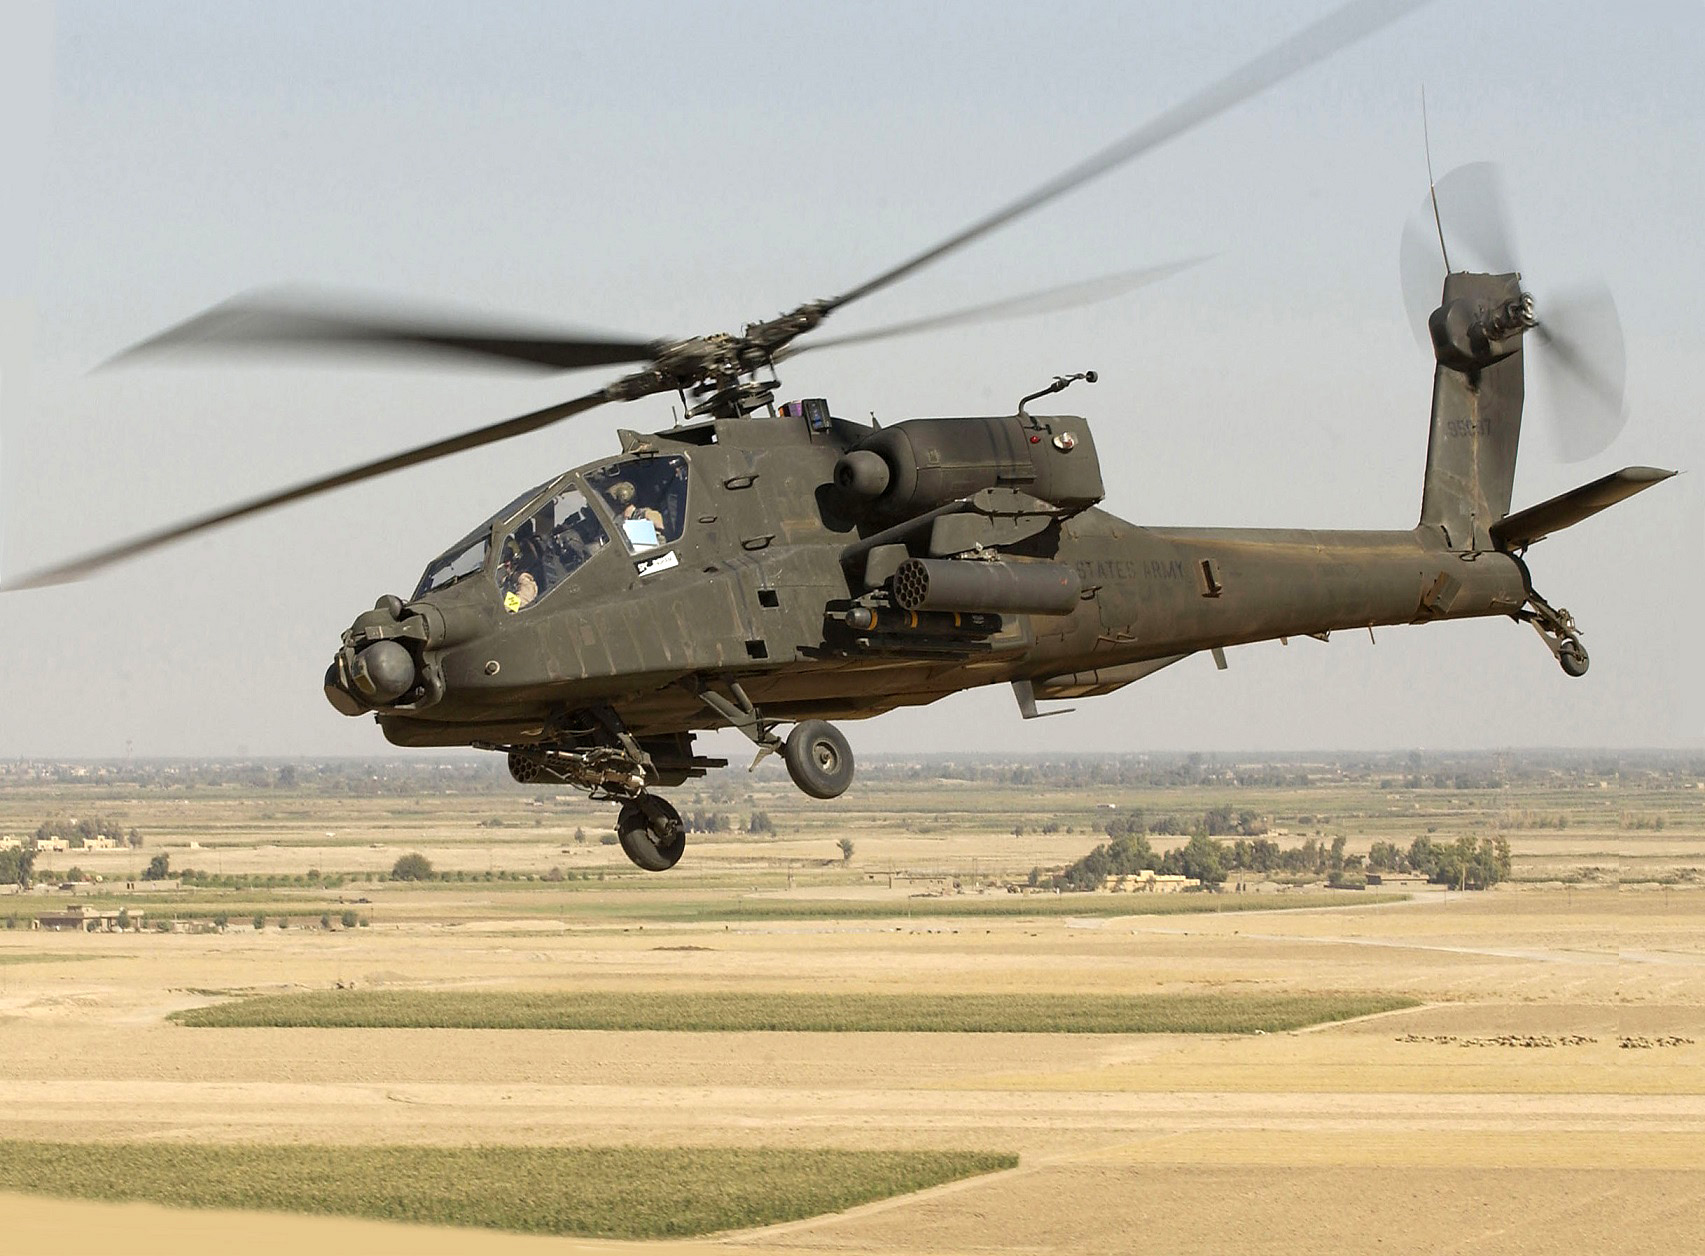 Boeing Defense has handed over the first modernized AH-64E Apache helicopter with improved features and software to the Dutch Army